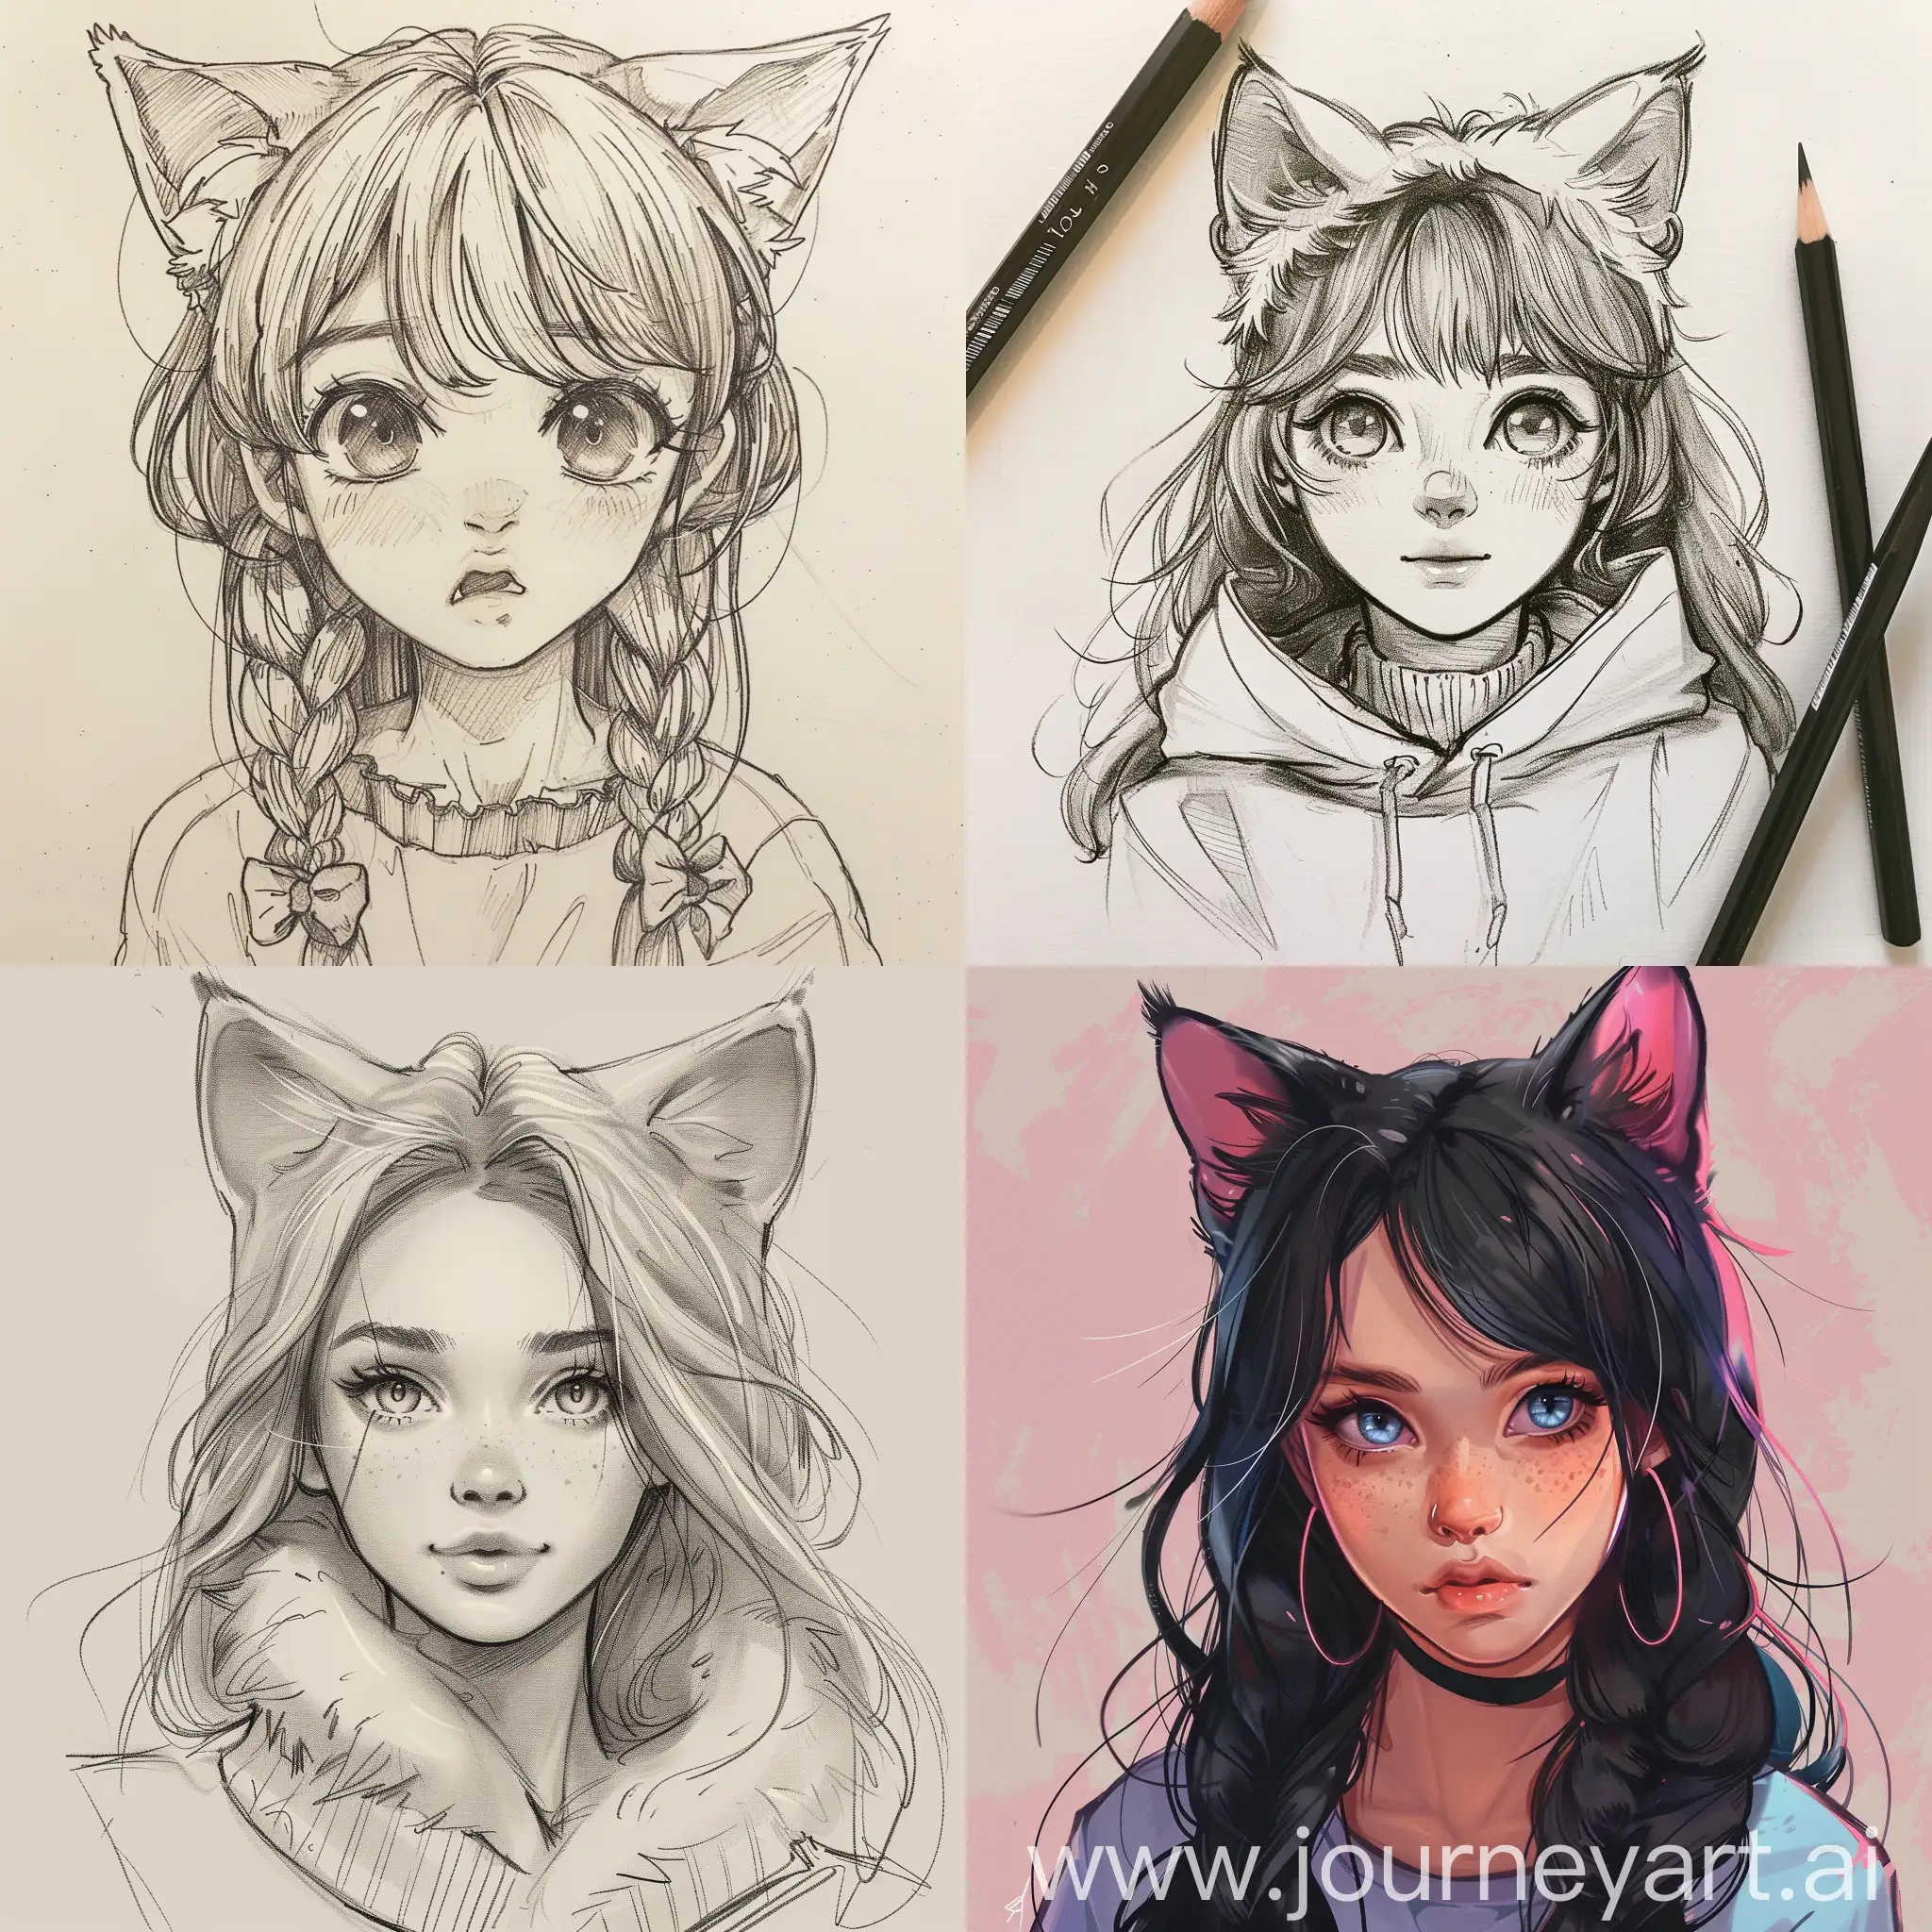 Adorable-Teenager-with-Cat-Ears-Fantasy-Art-Illustration